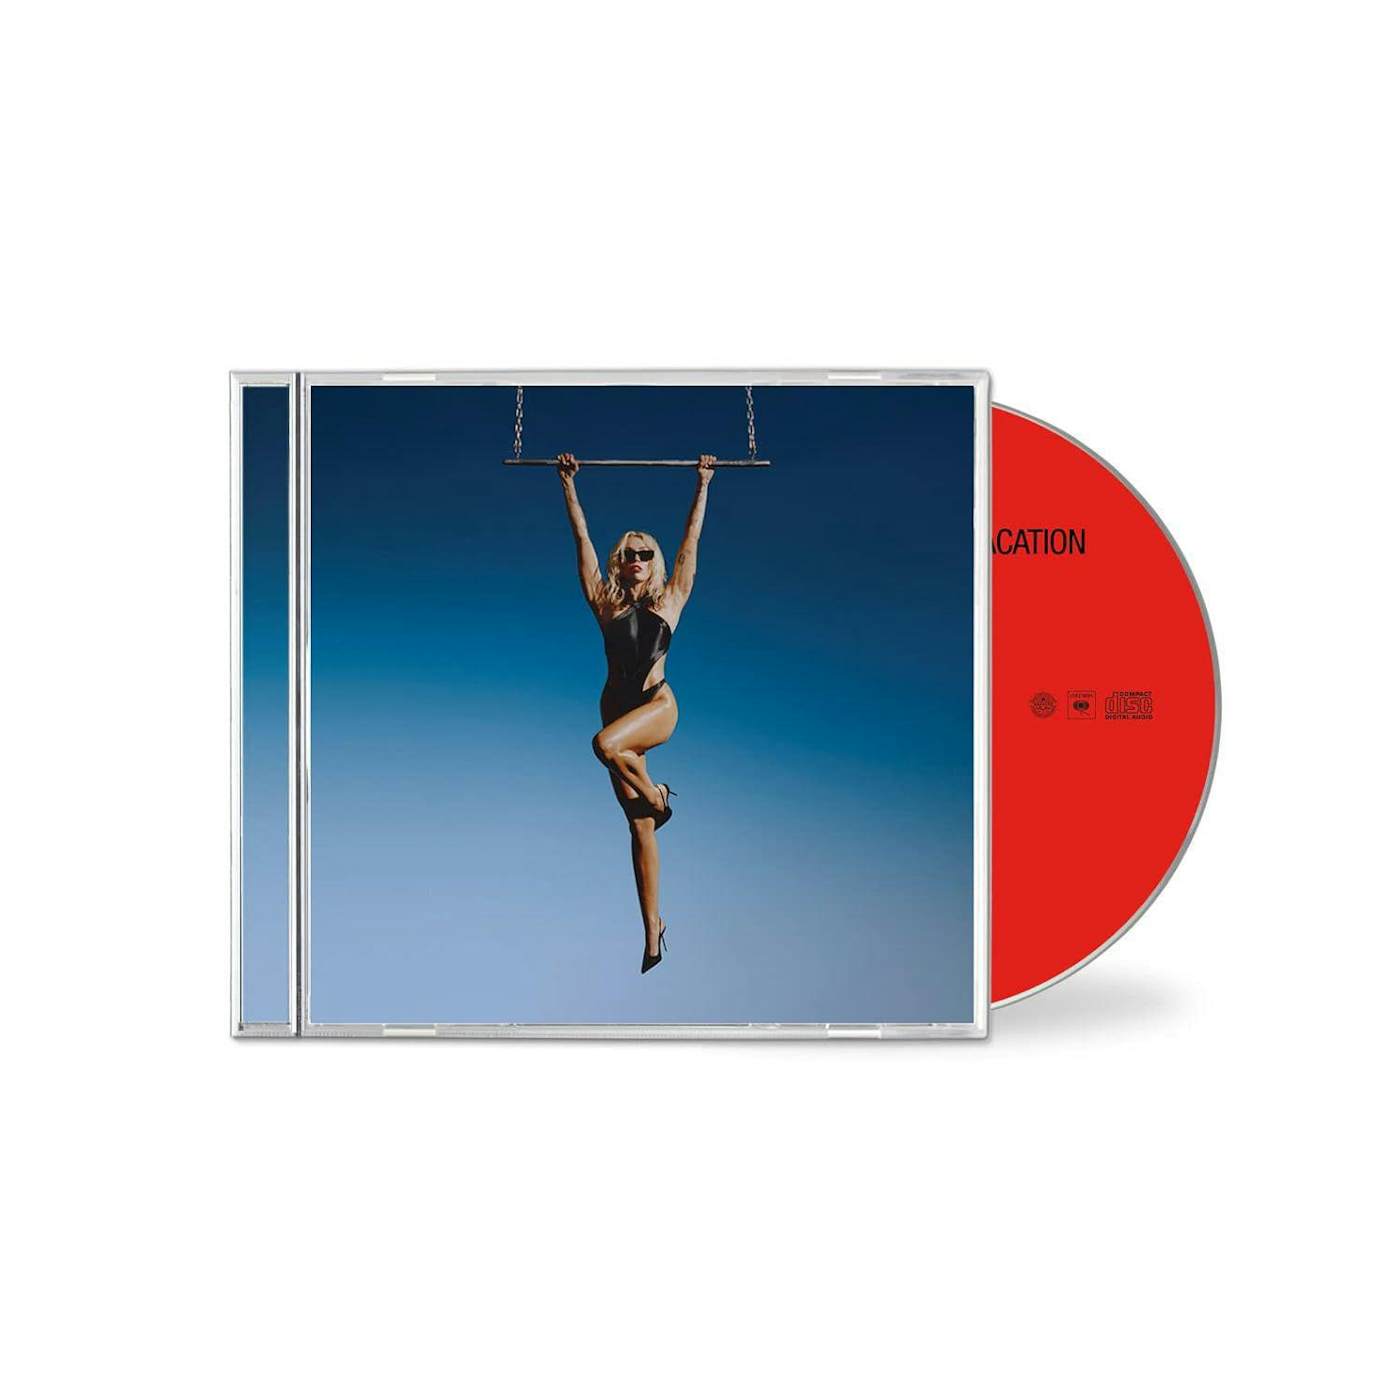 Miley Cyrus Endless Summer Vacation CD (Explicit Content)